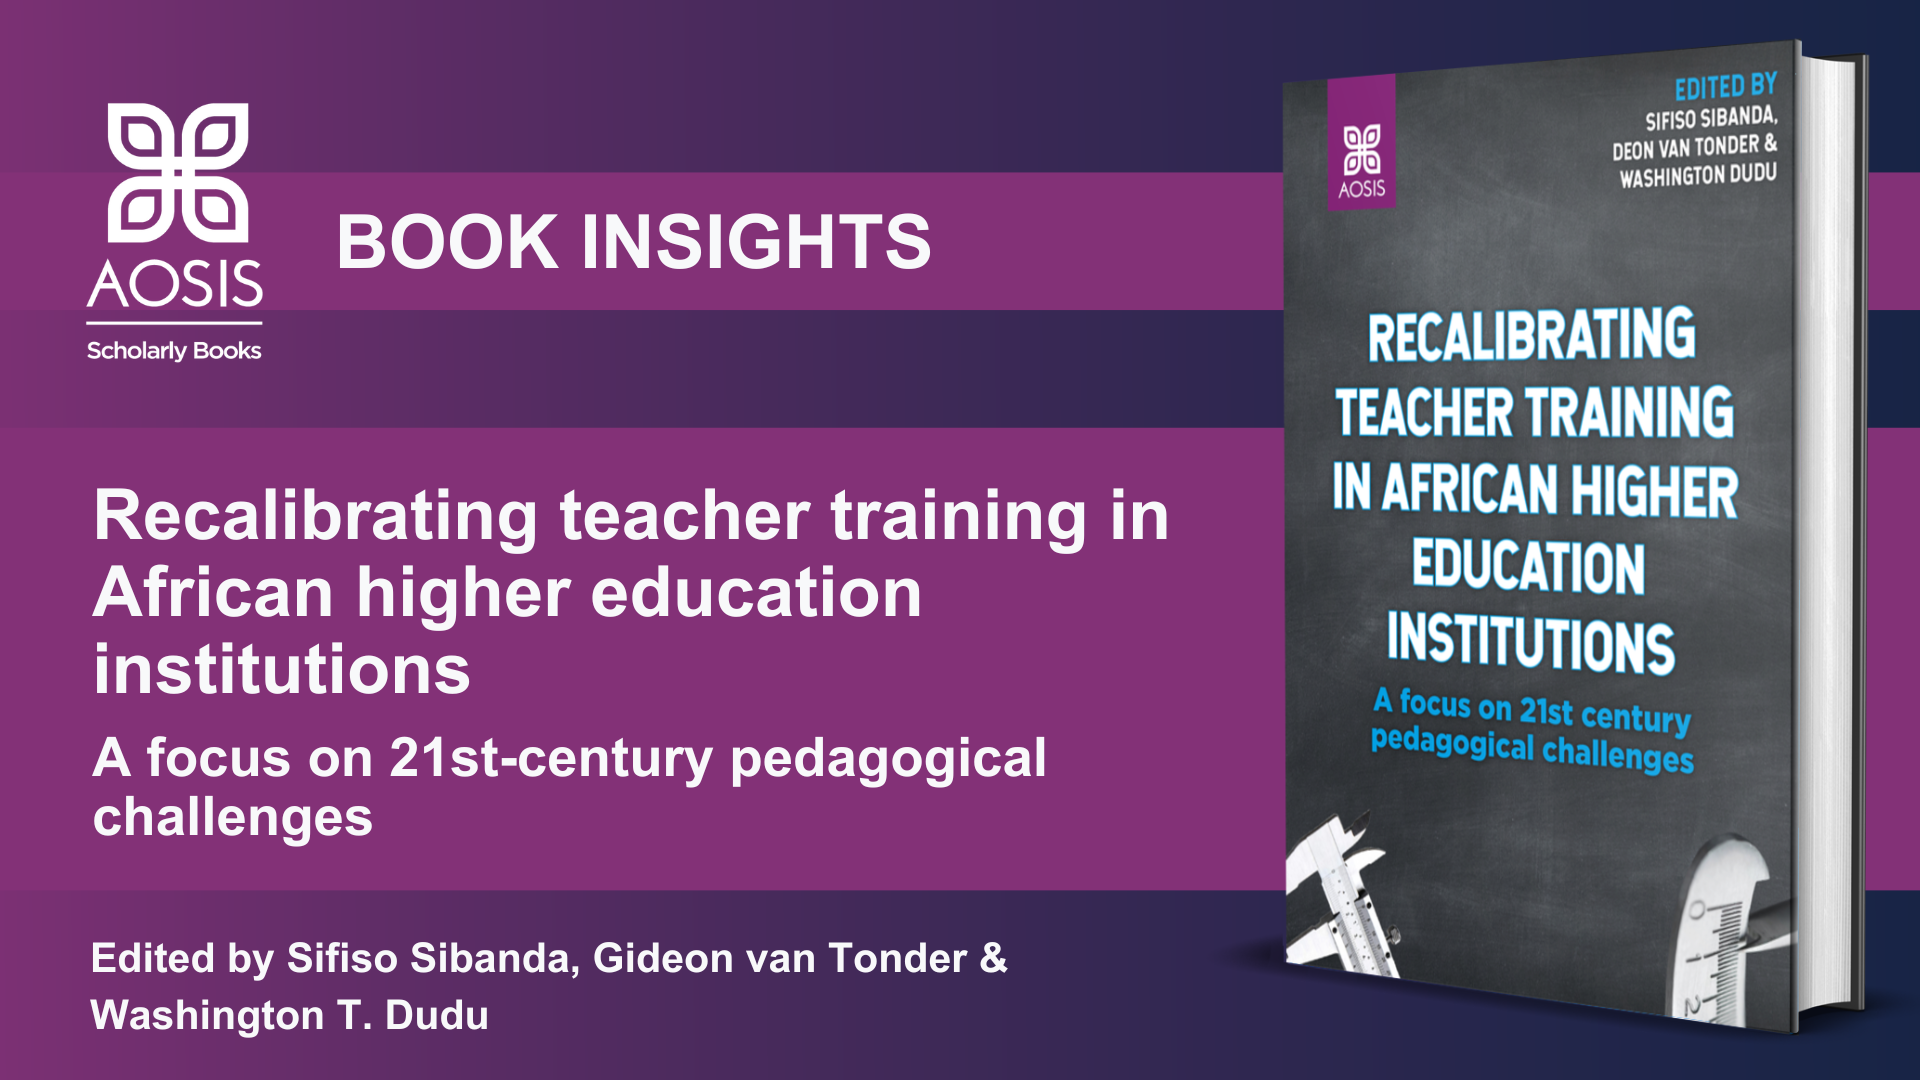 Recalibrating teacher training in African higher education institutions: A focus on 21st-century pedagogical challenges